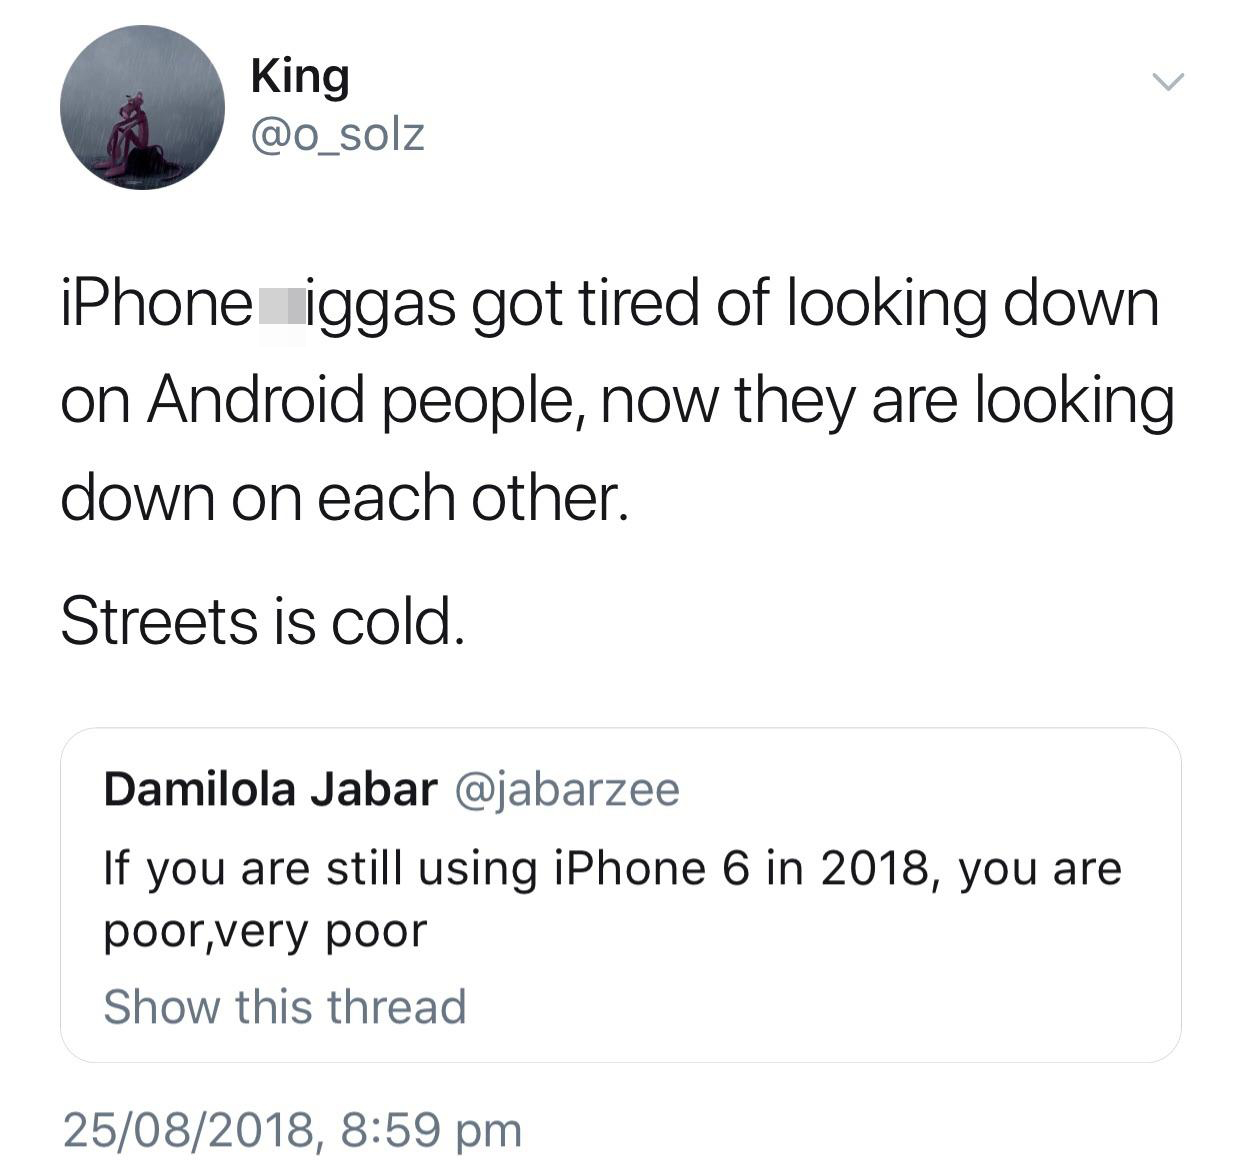 tweet - never talks to crush meme - King iPhone iggas got tired of looking down on Android people, now they are looking down on each other. Streets is cold. Damilola Jabar If you are still using iPhone 6 in 2018, you are poor,very poor Show this thread 25